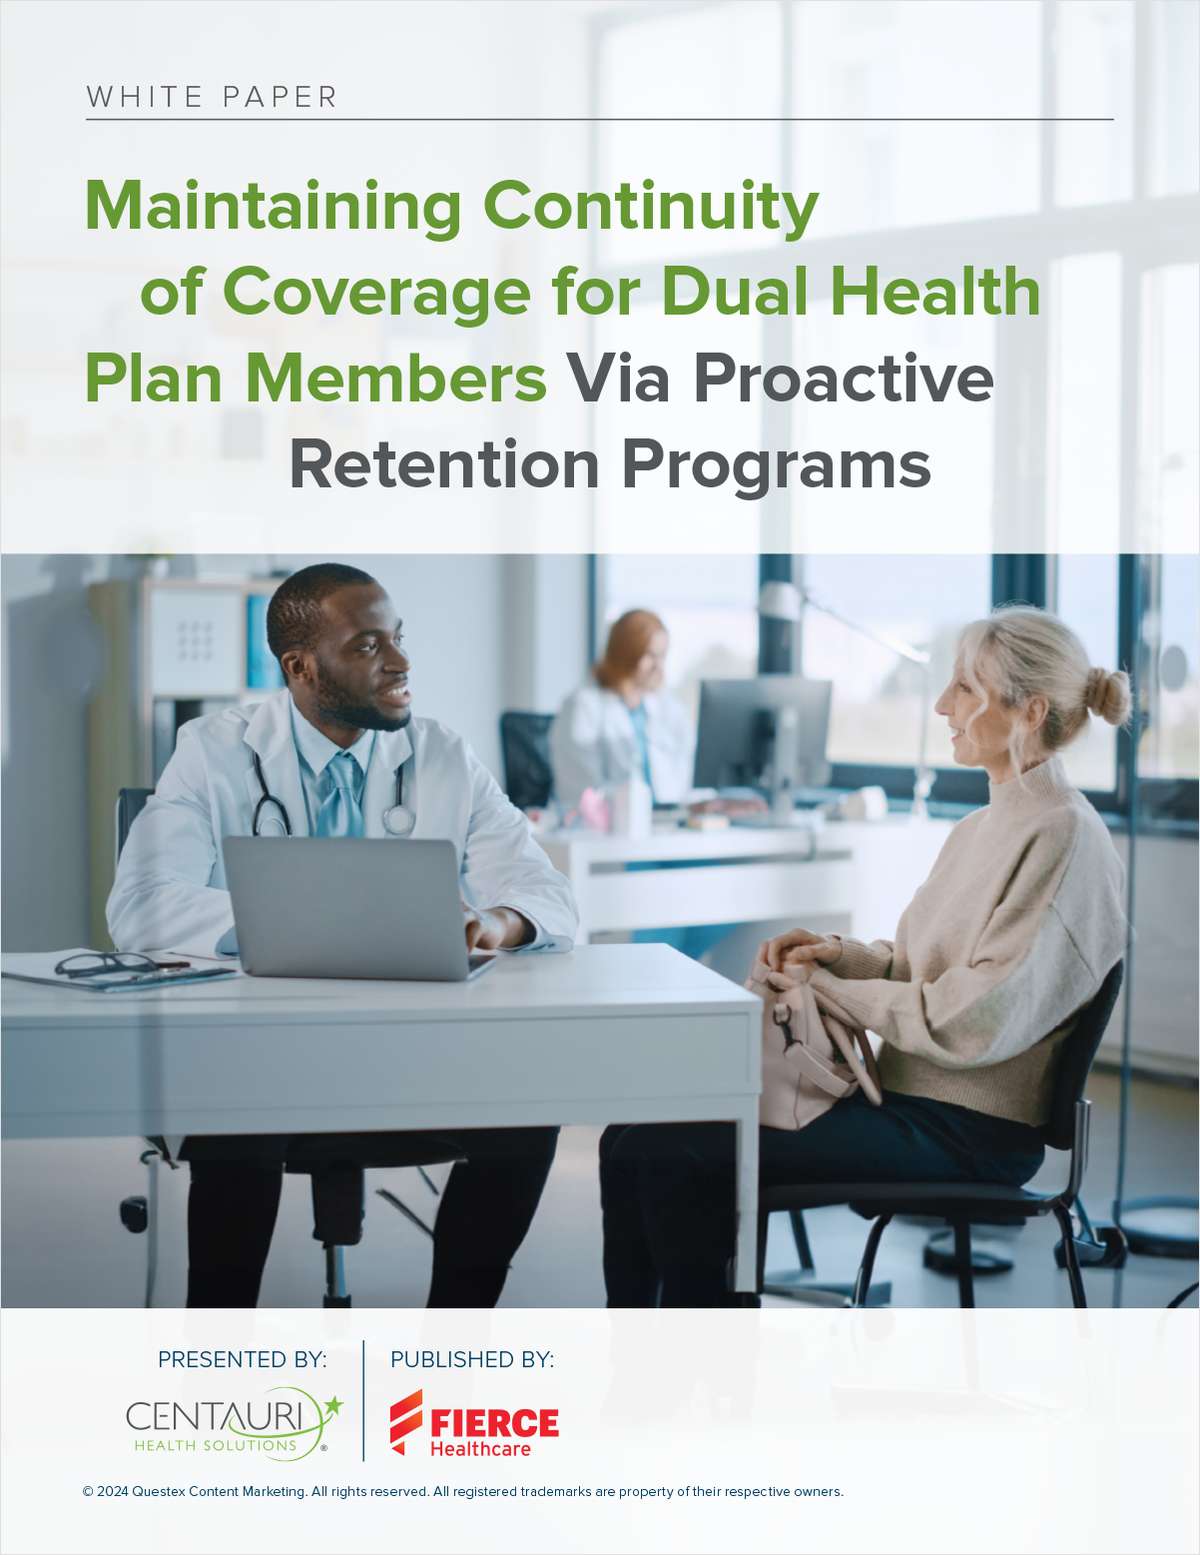 Maintaining Continuity of Coverage for Dual Health Plan Members Via Proactive Retention Programs